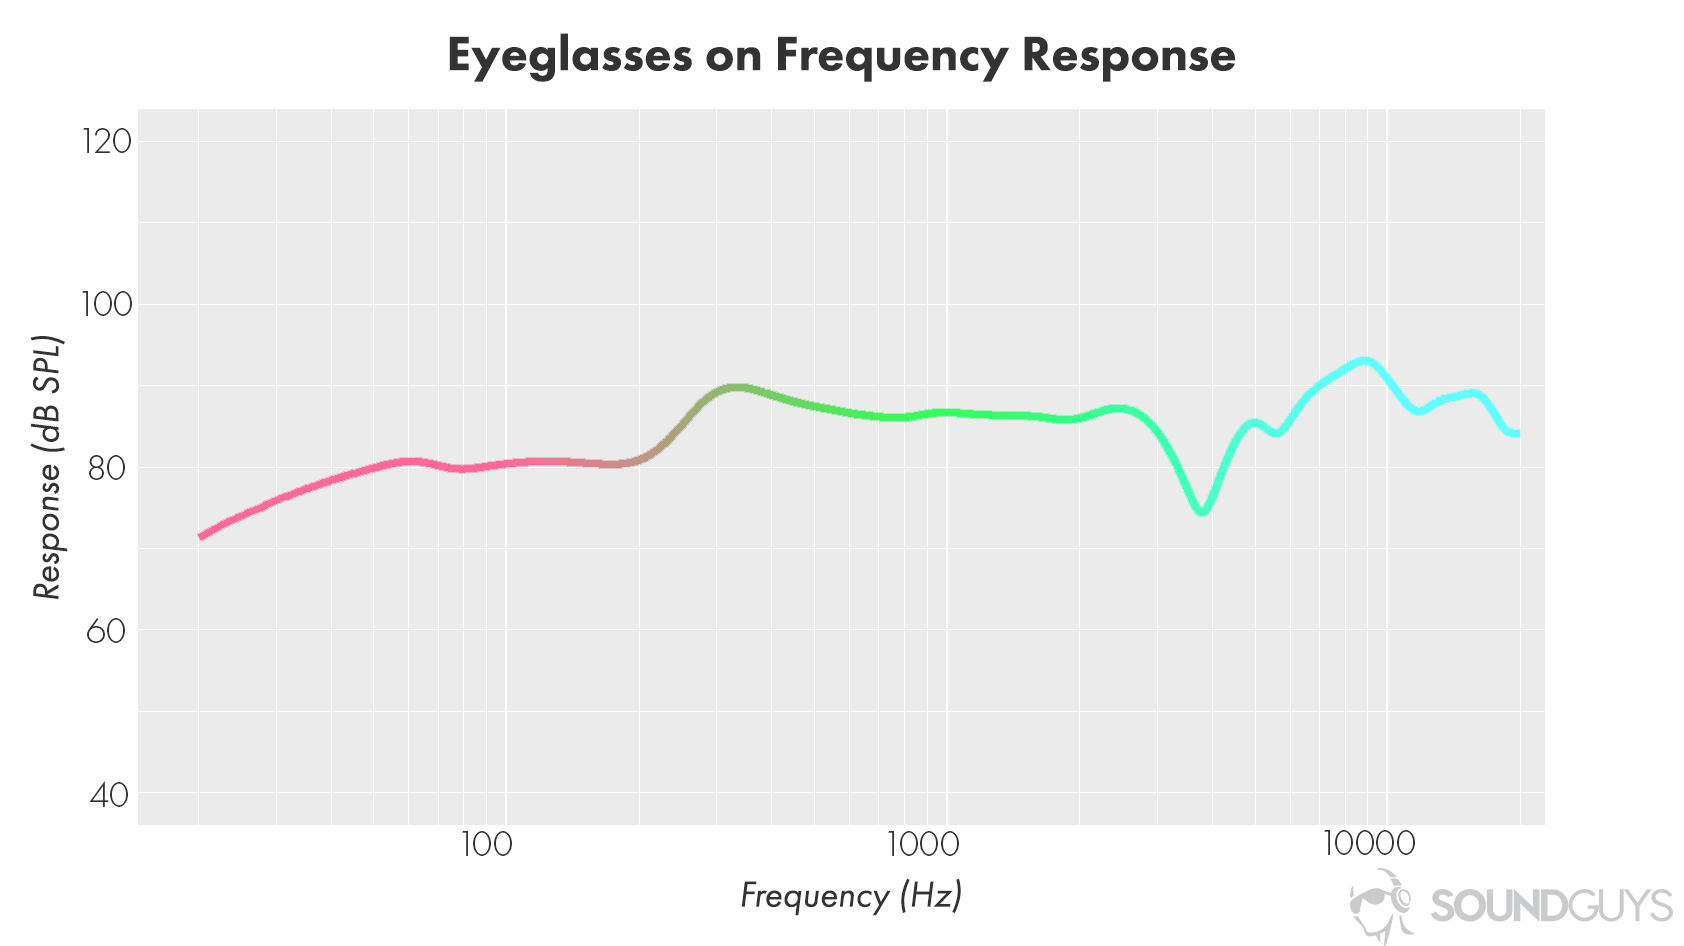 Best headphones from best buy: A frequency response chart showing the effect of eyeglasses on measured results and fit.